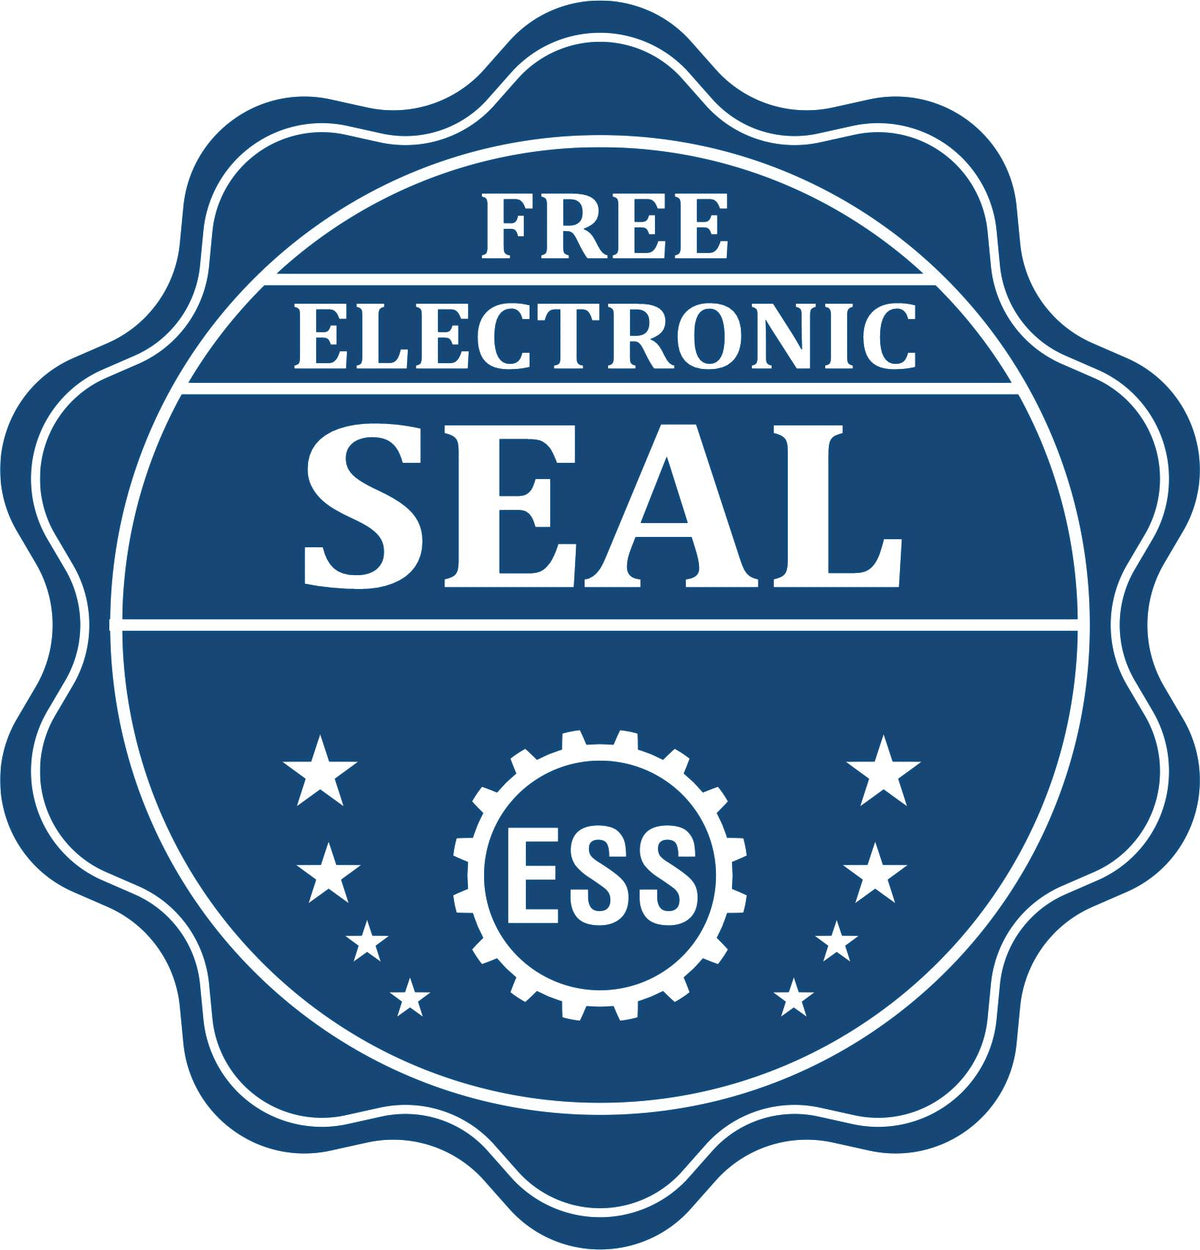 A badge showing a free electronic seal for the Nebraska Geologist Desk Seal with stars and the ESS gear on the emblem.